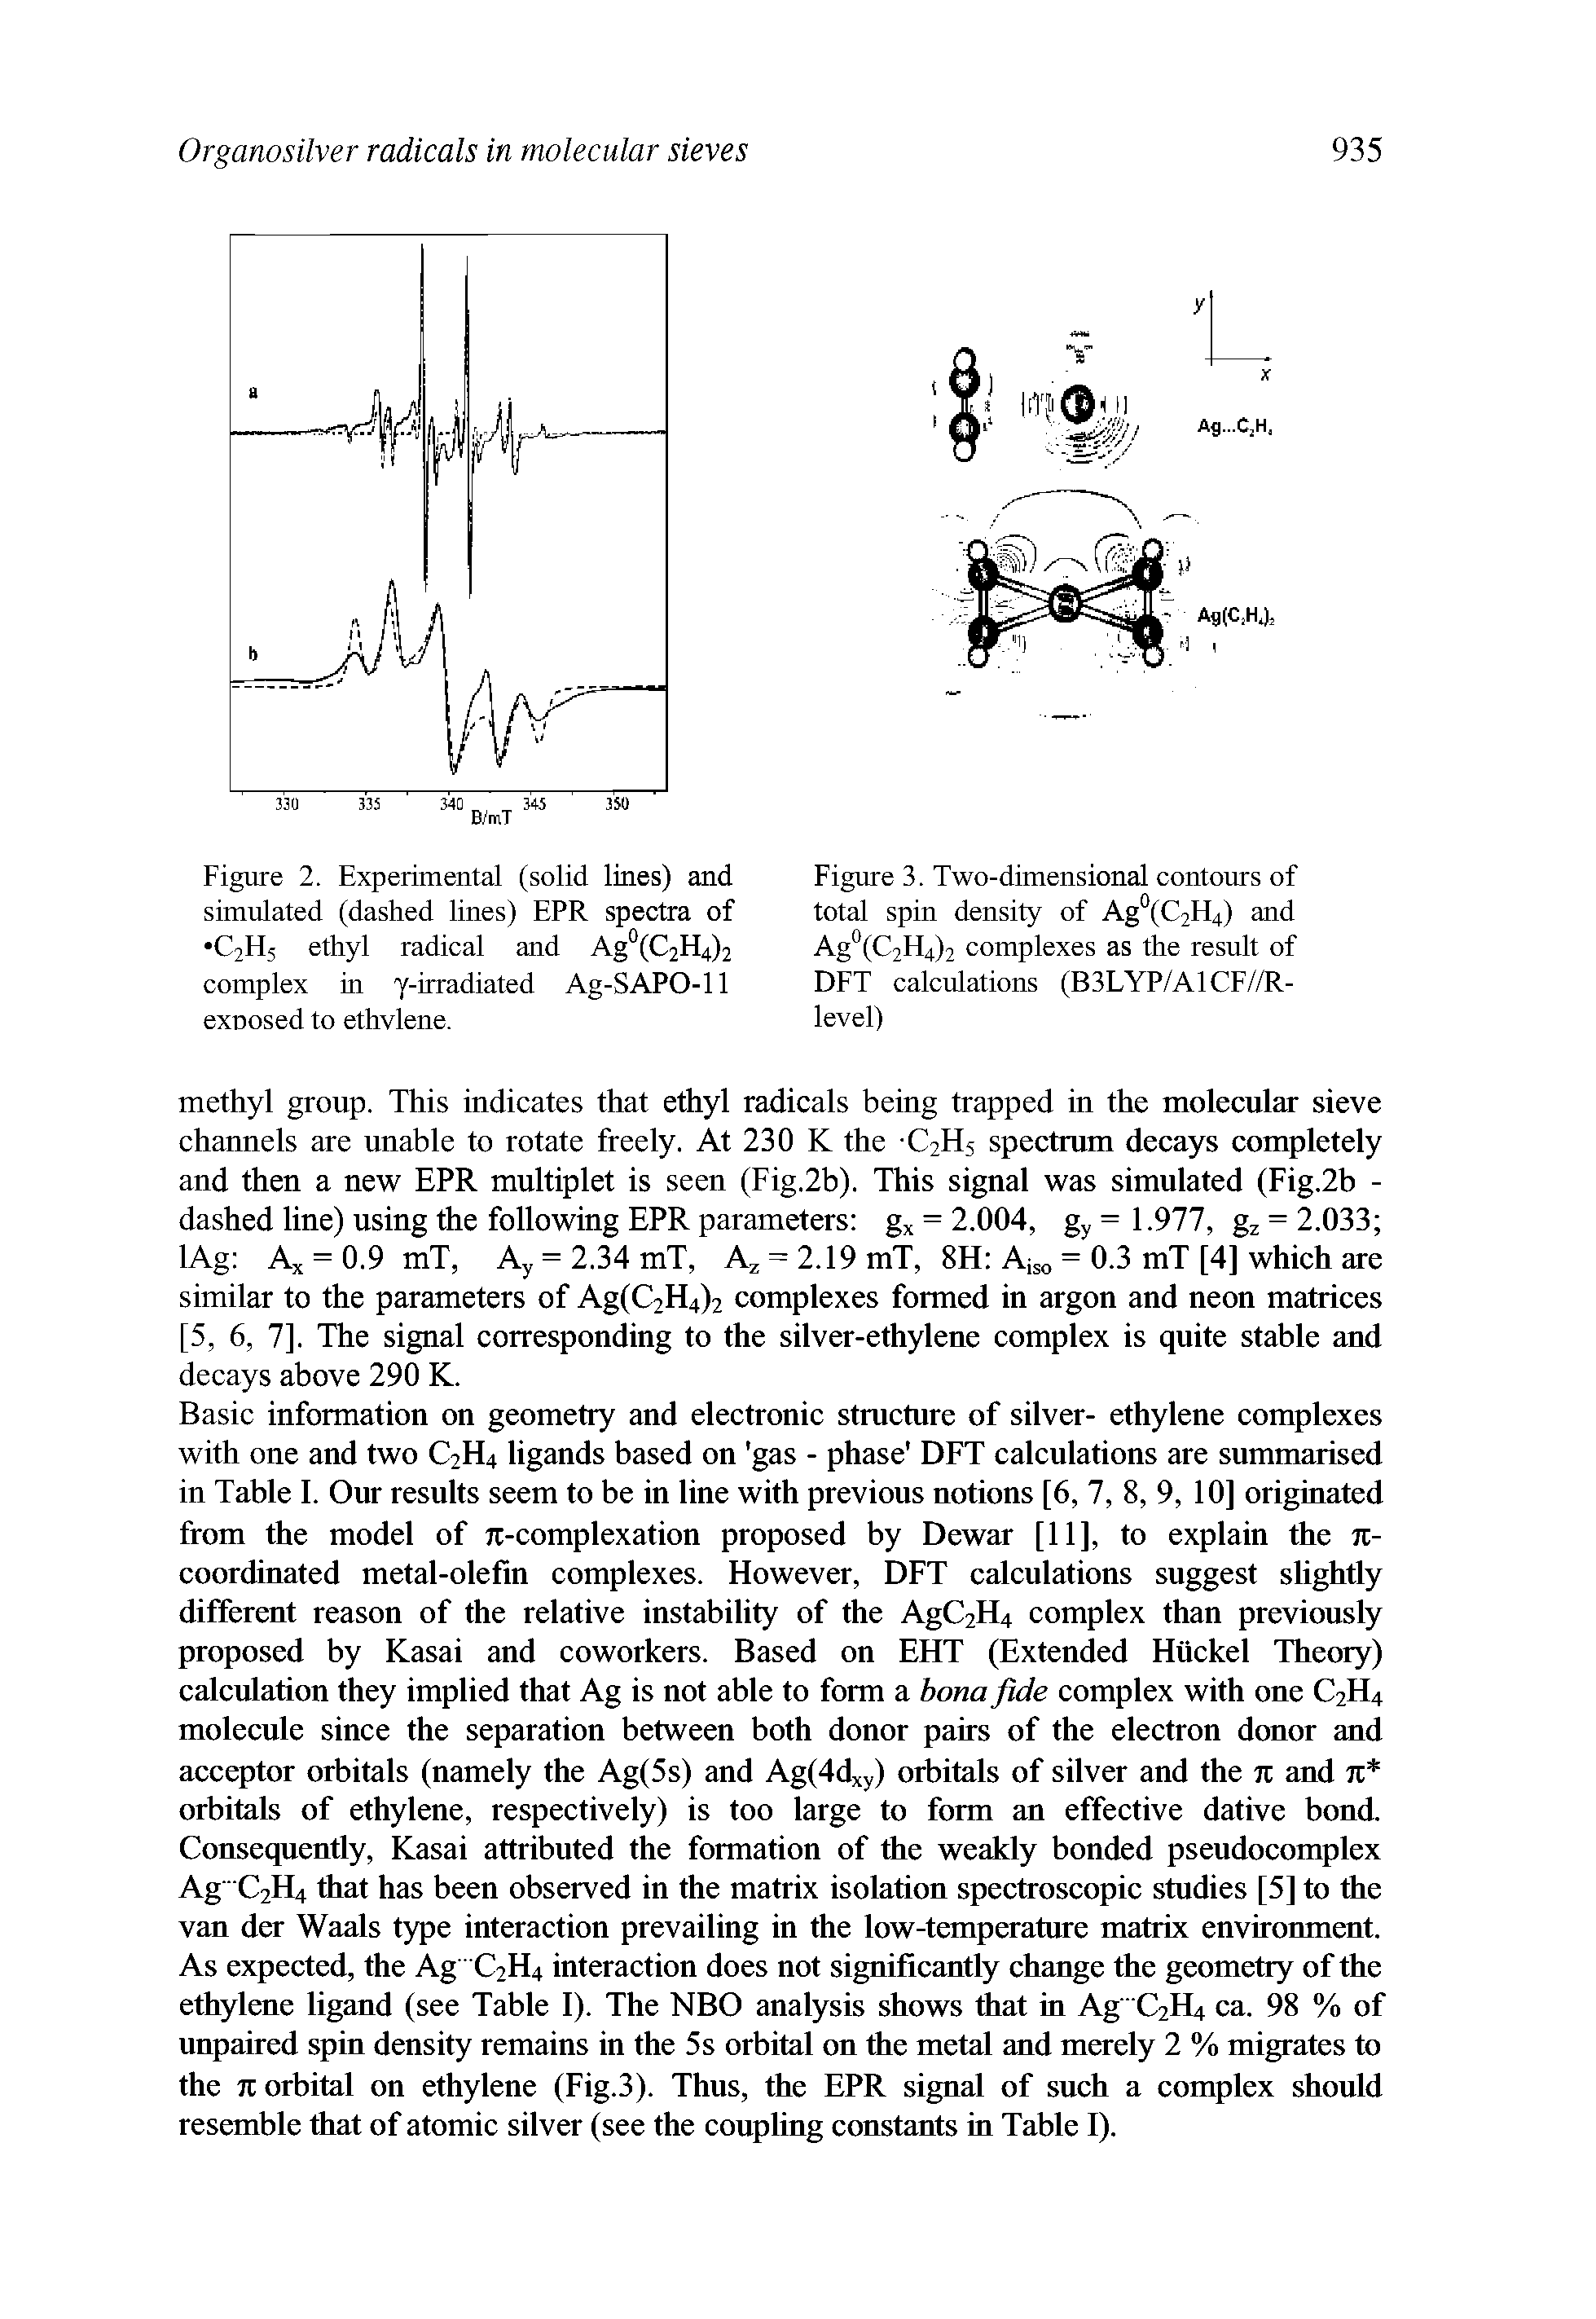 Figure 3. Two-dimensional contours of total spin density of Ag°(C2Fl4) and Ag°(C2Fl4)2 complexes as the result of DFT calculations (B3LYP/A1CF//R-level)...